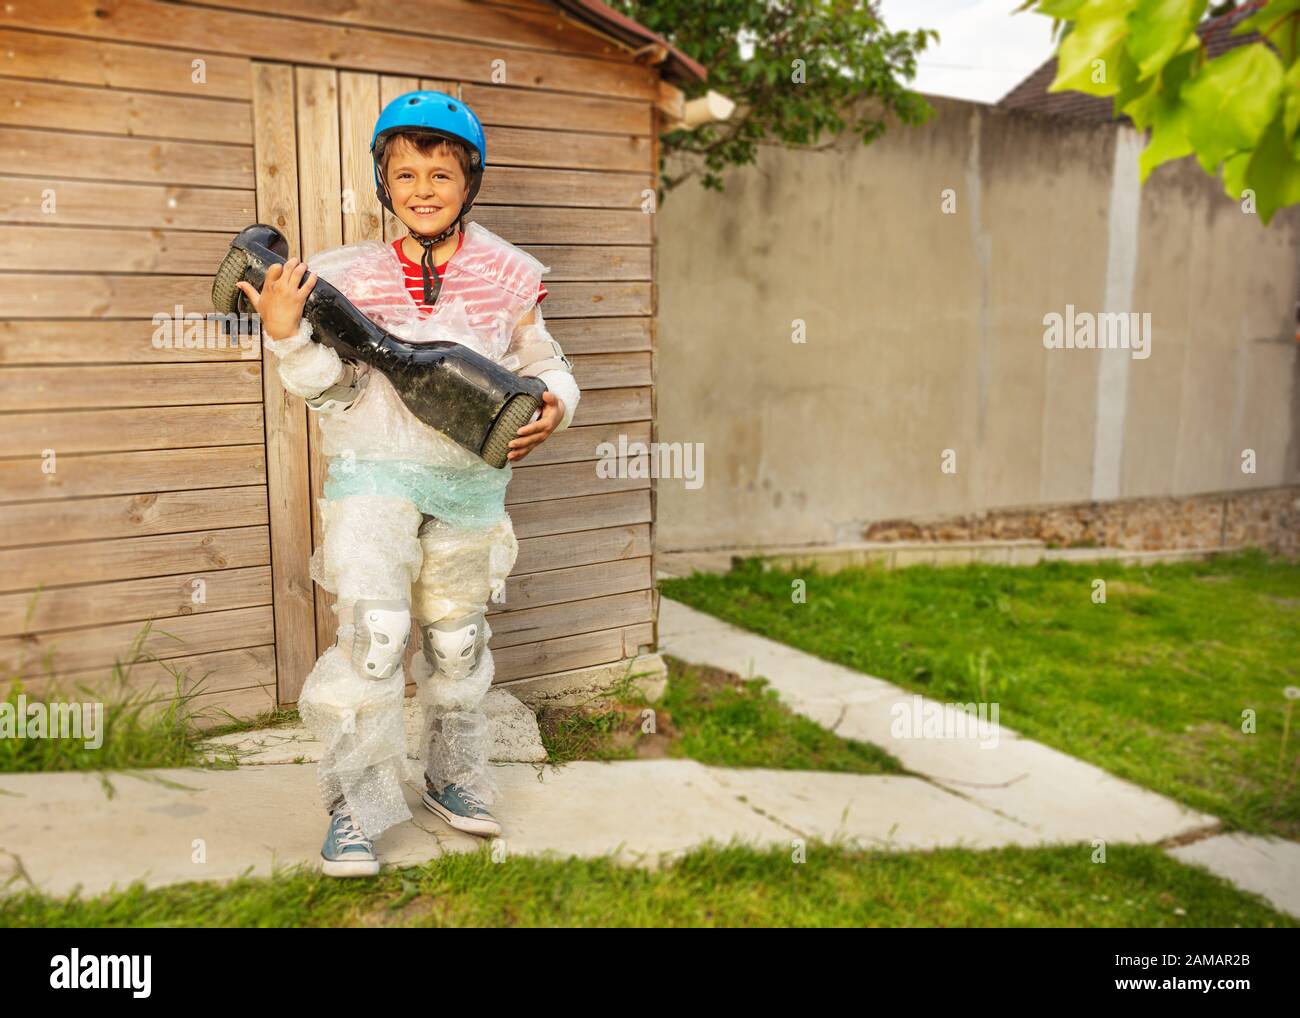 Little boy with hoverboard and overprotective mother keeping a ...